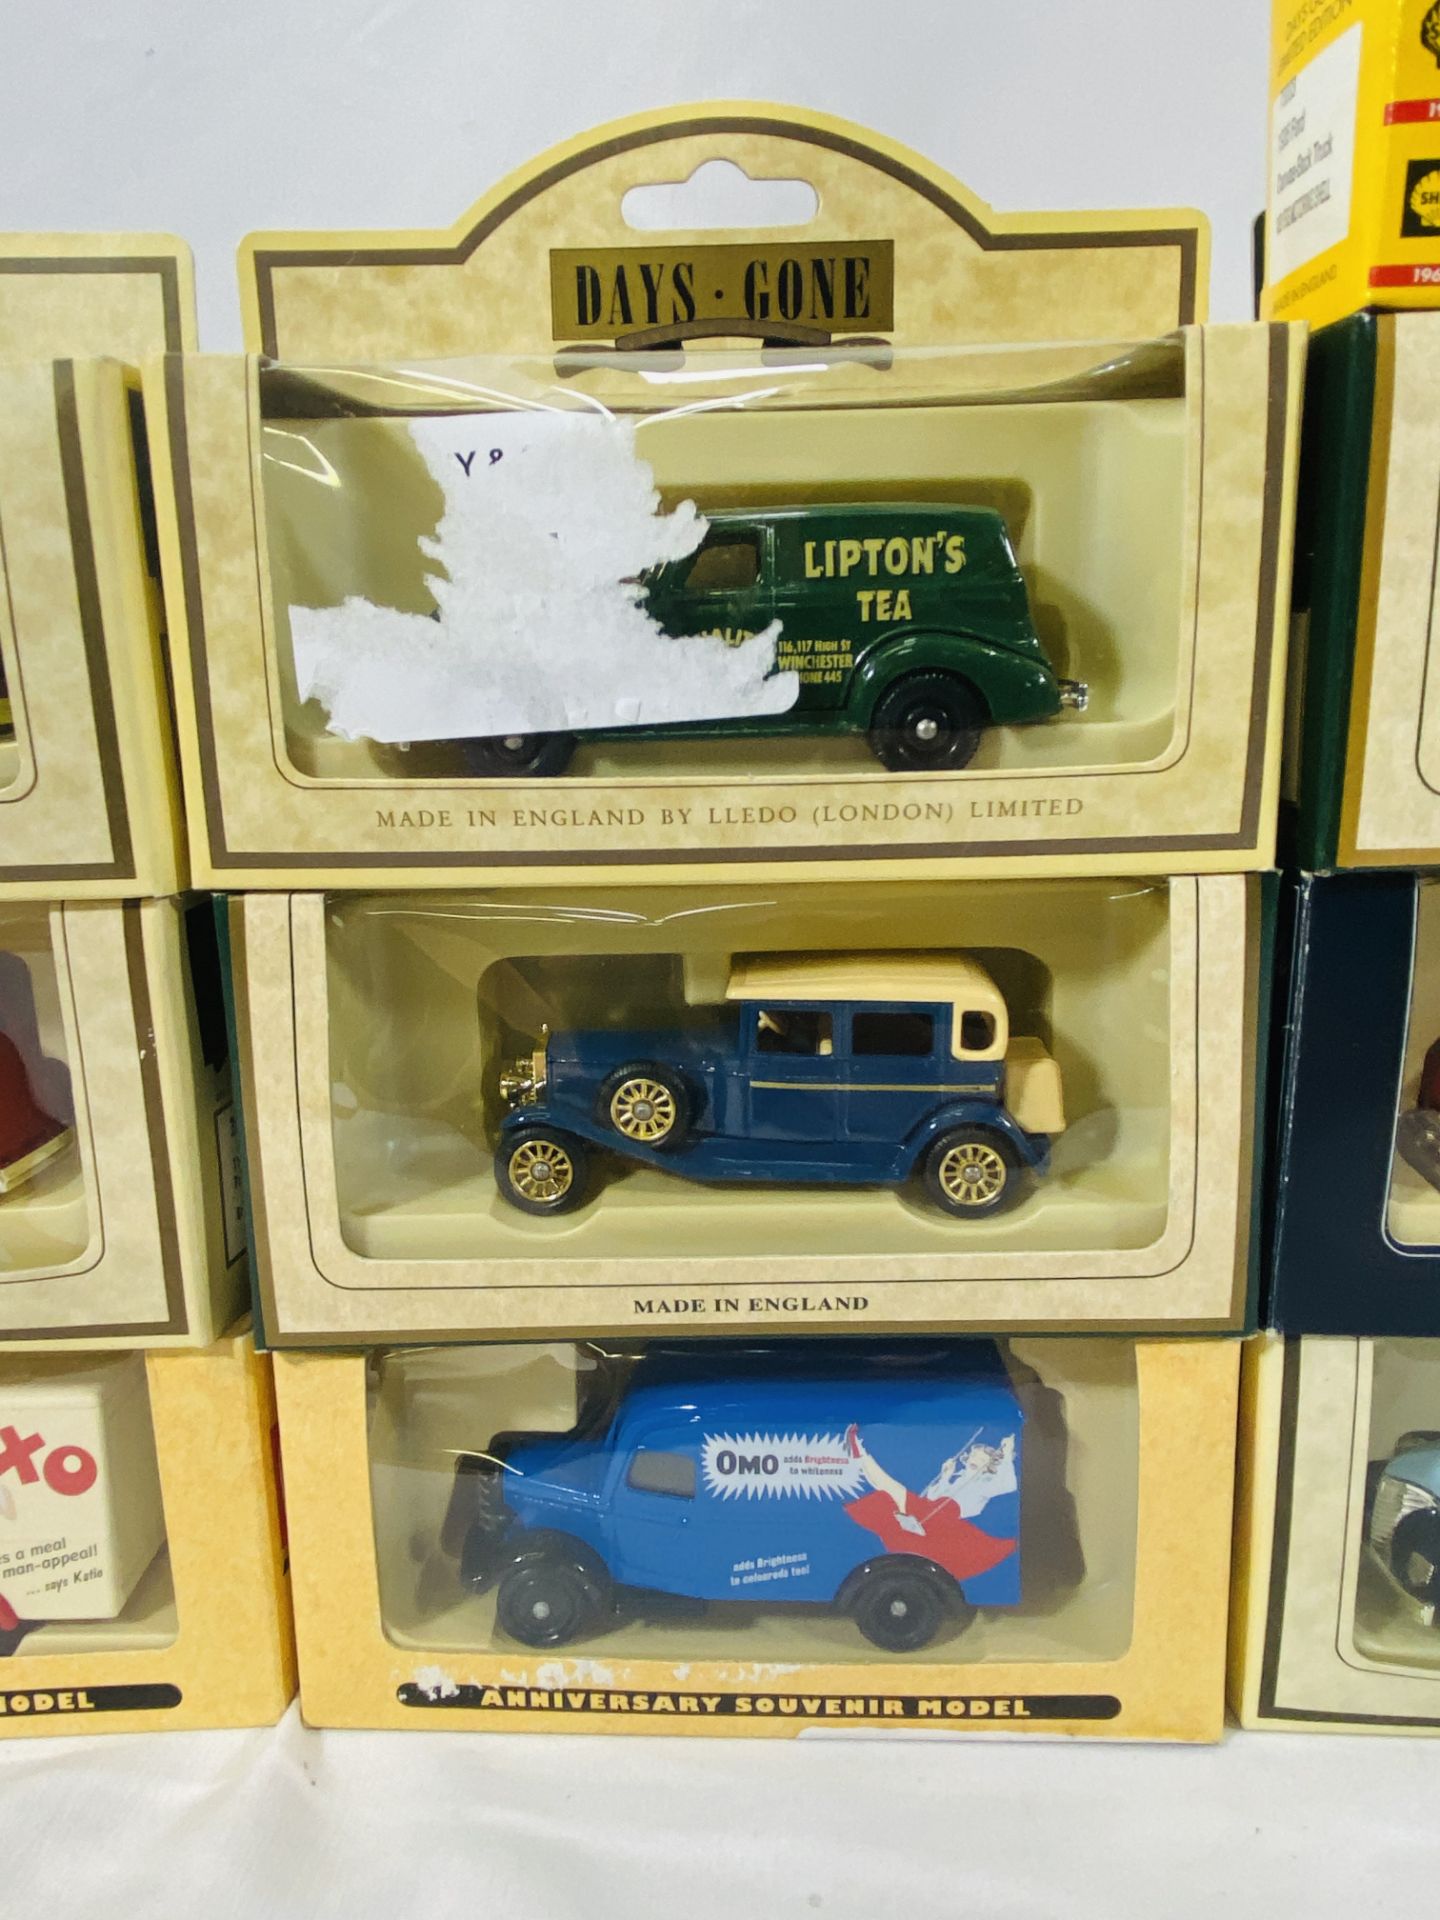 A collection of Days Gone vans together with other model vehicles - Image 3 of 5